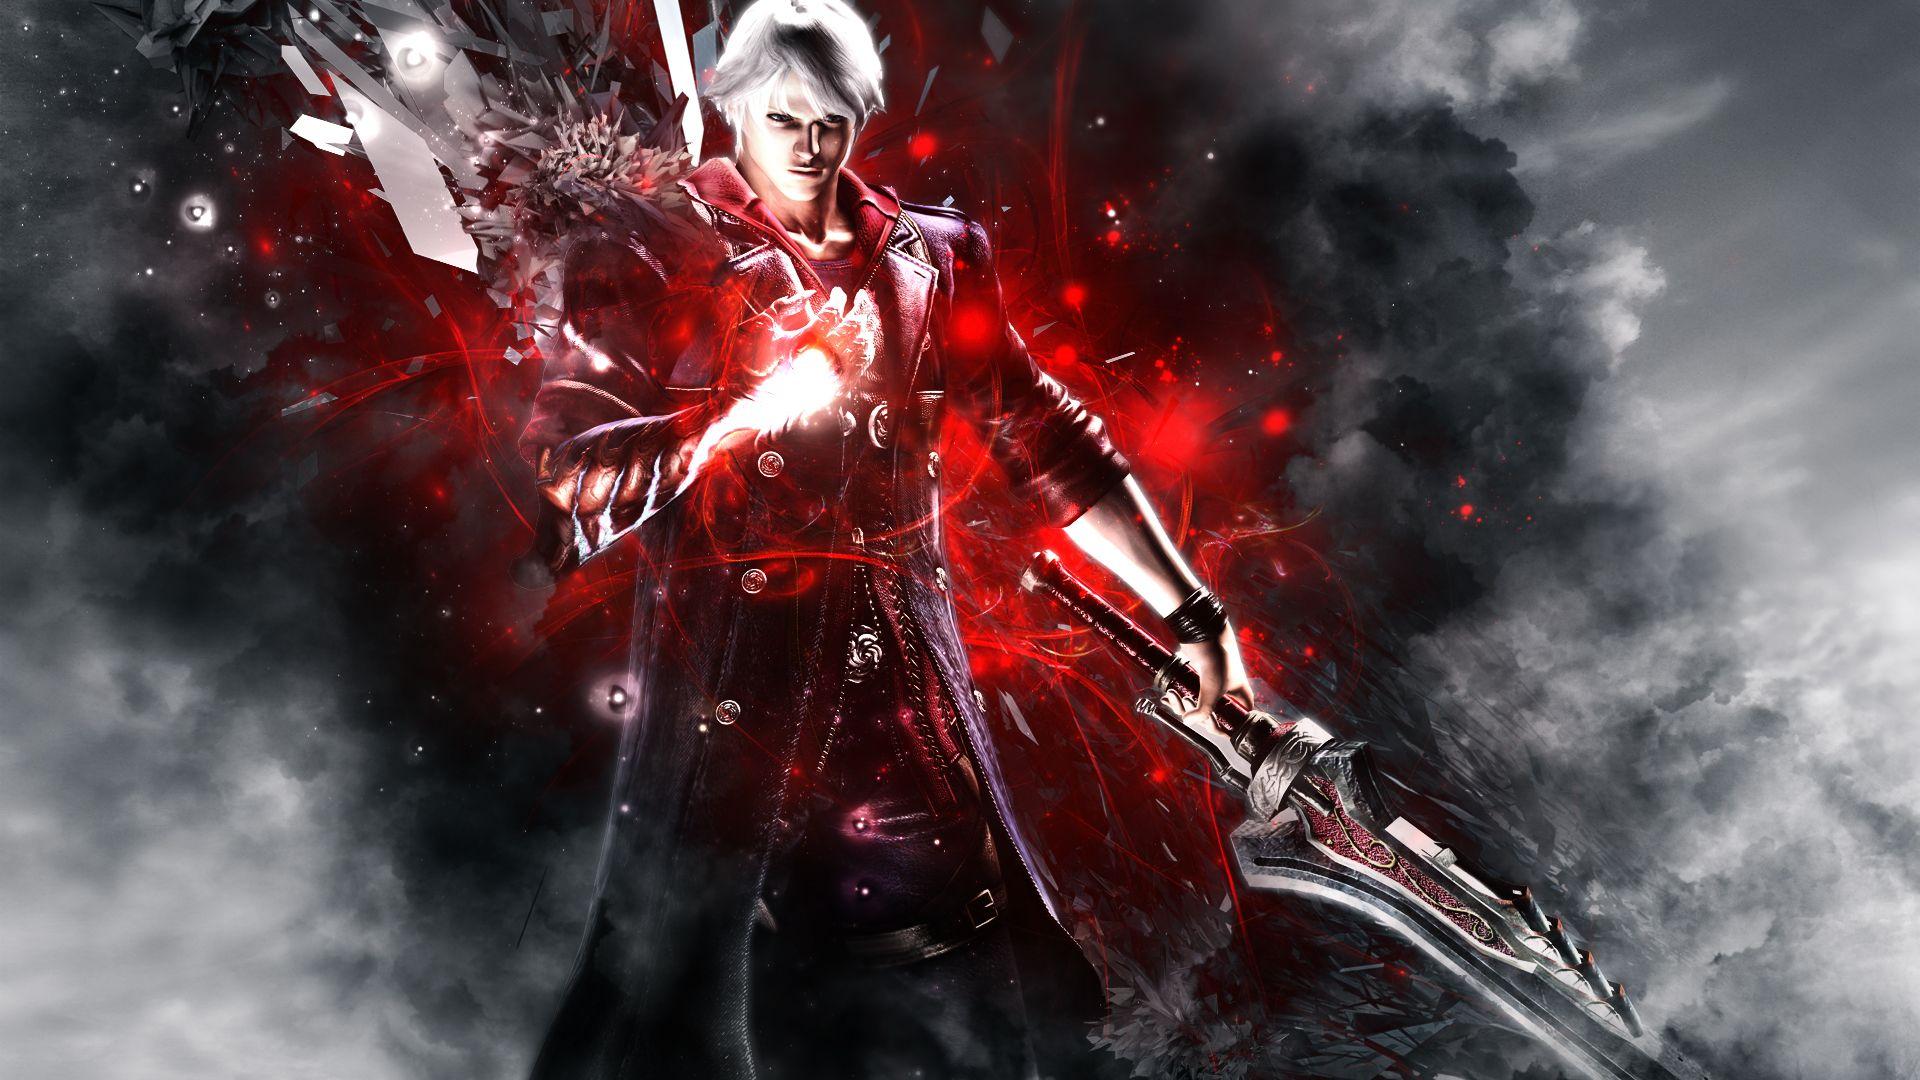 09 2015 Devil May Cry, Games Image Galleries